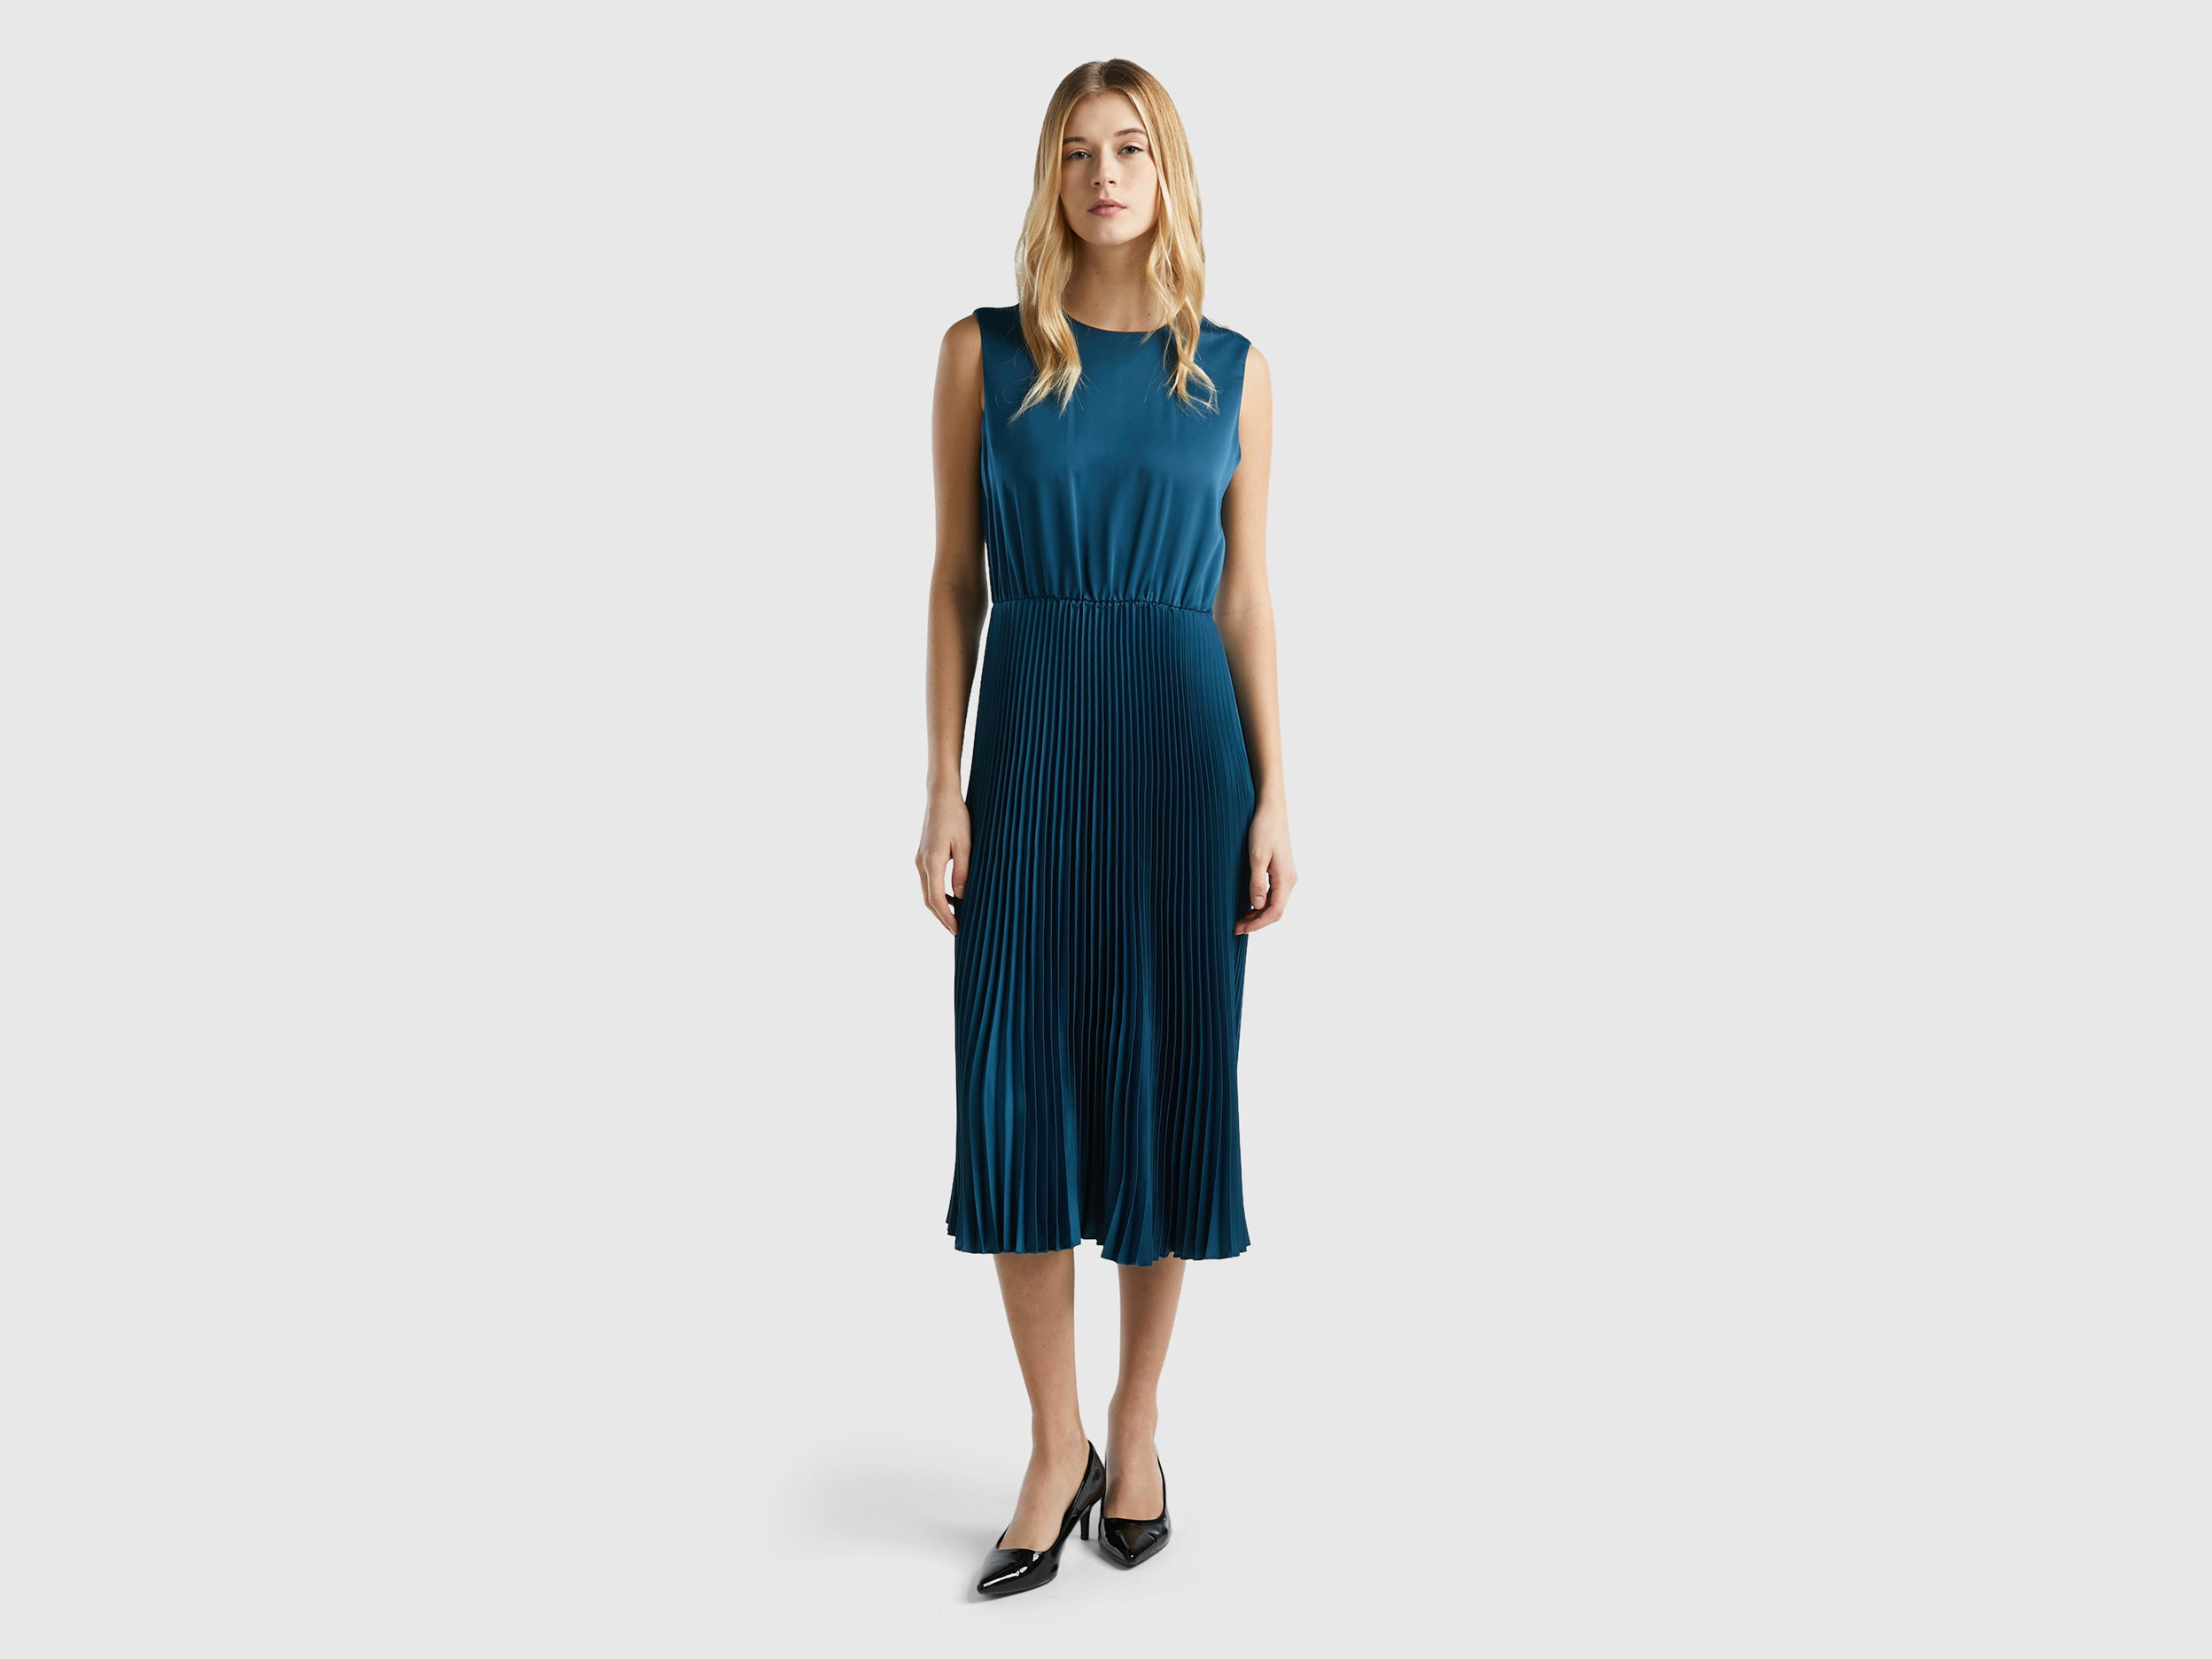 Benetton, Midi Dress With Pleated Skirt, size L, Teal, Women